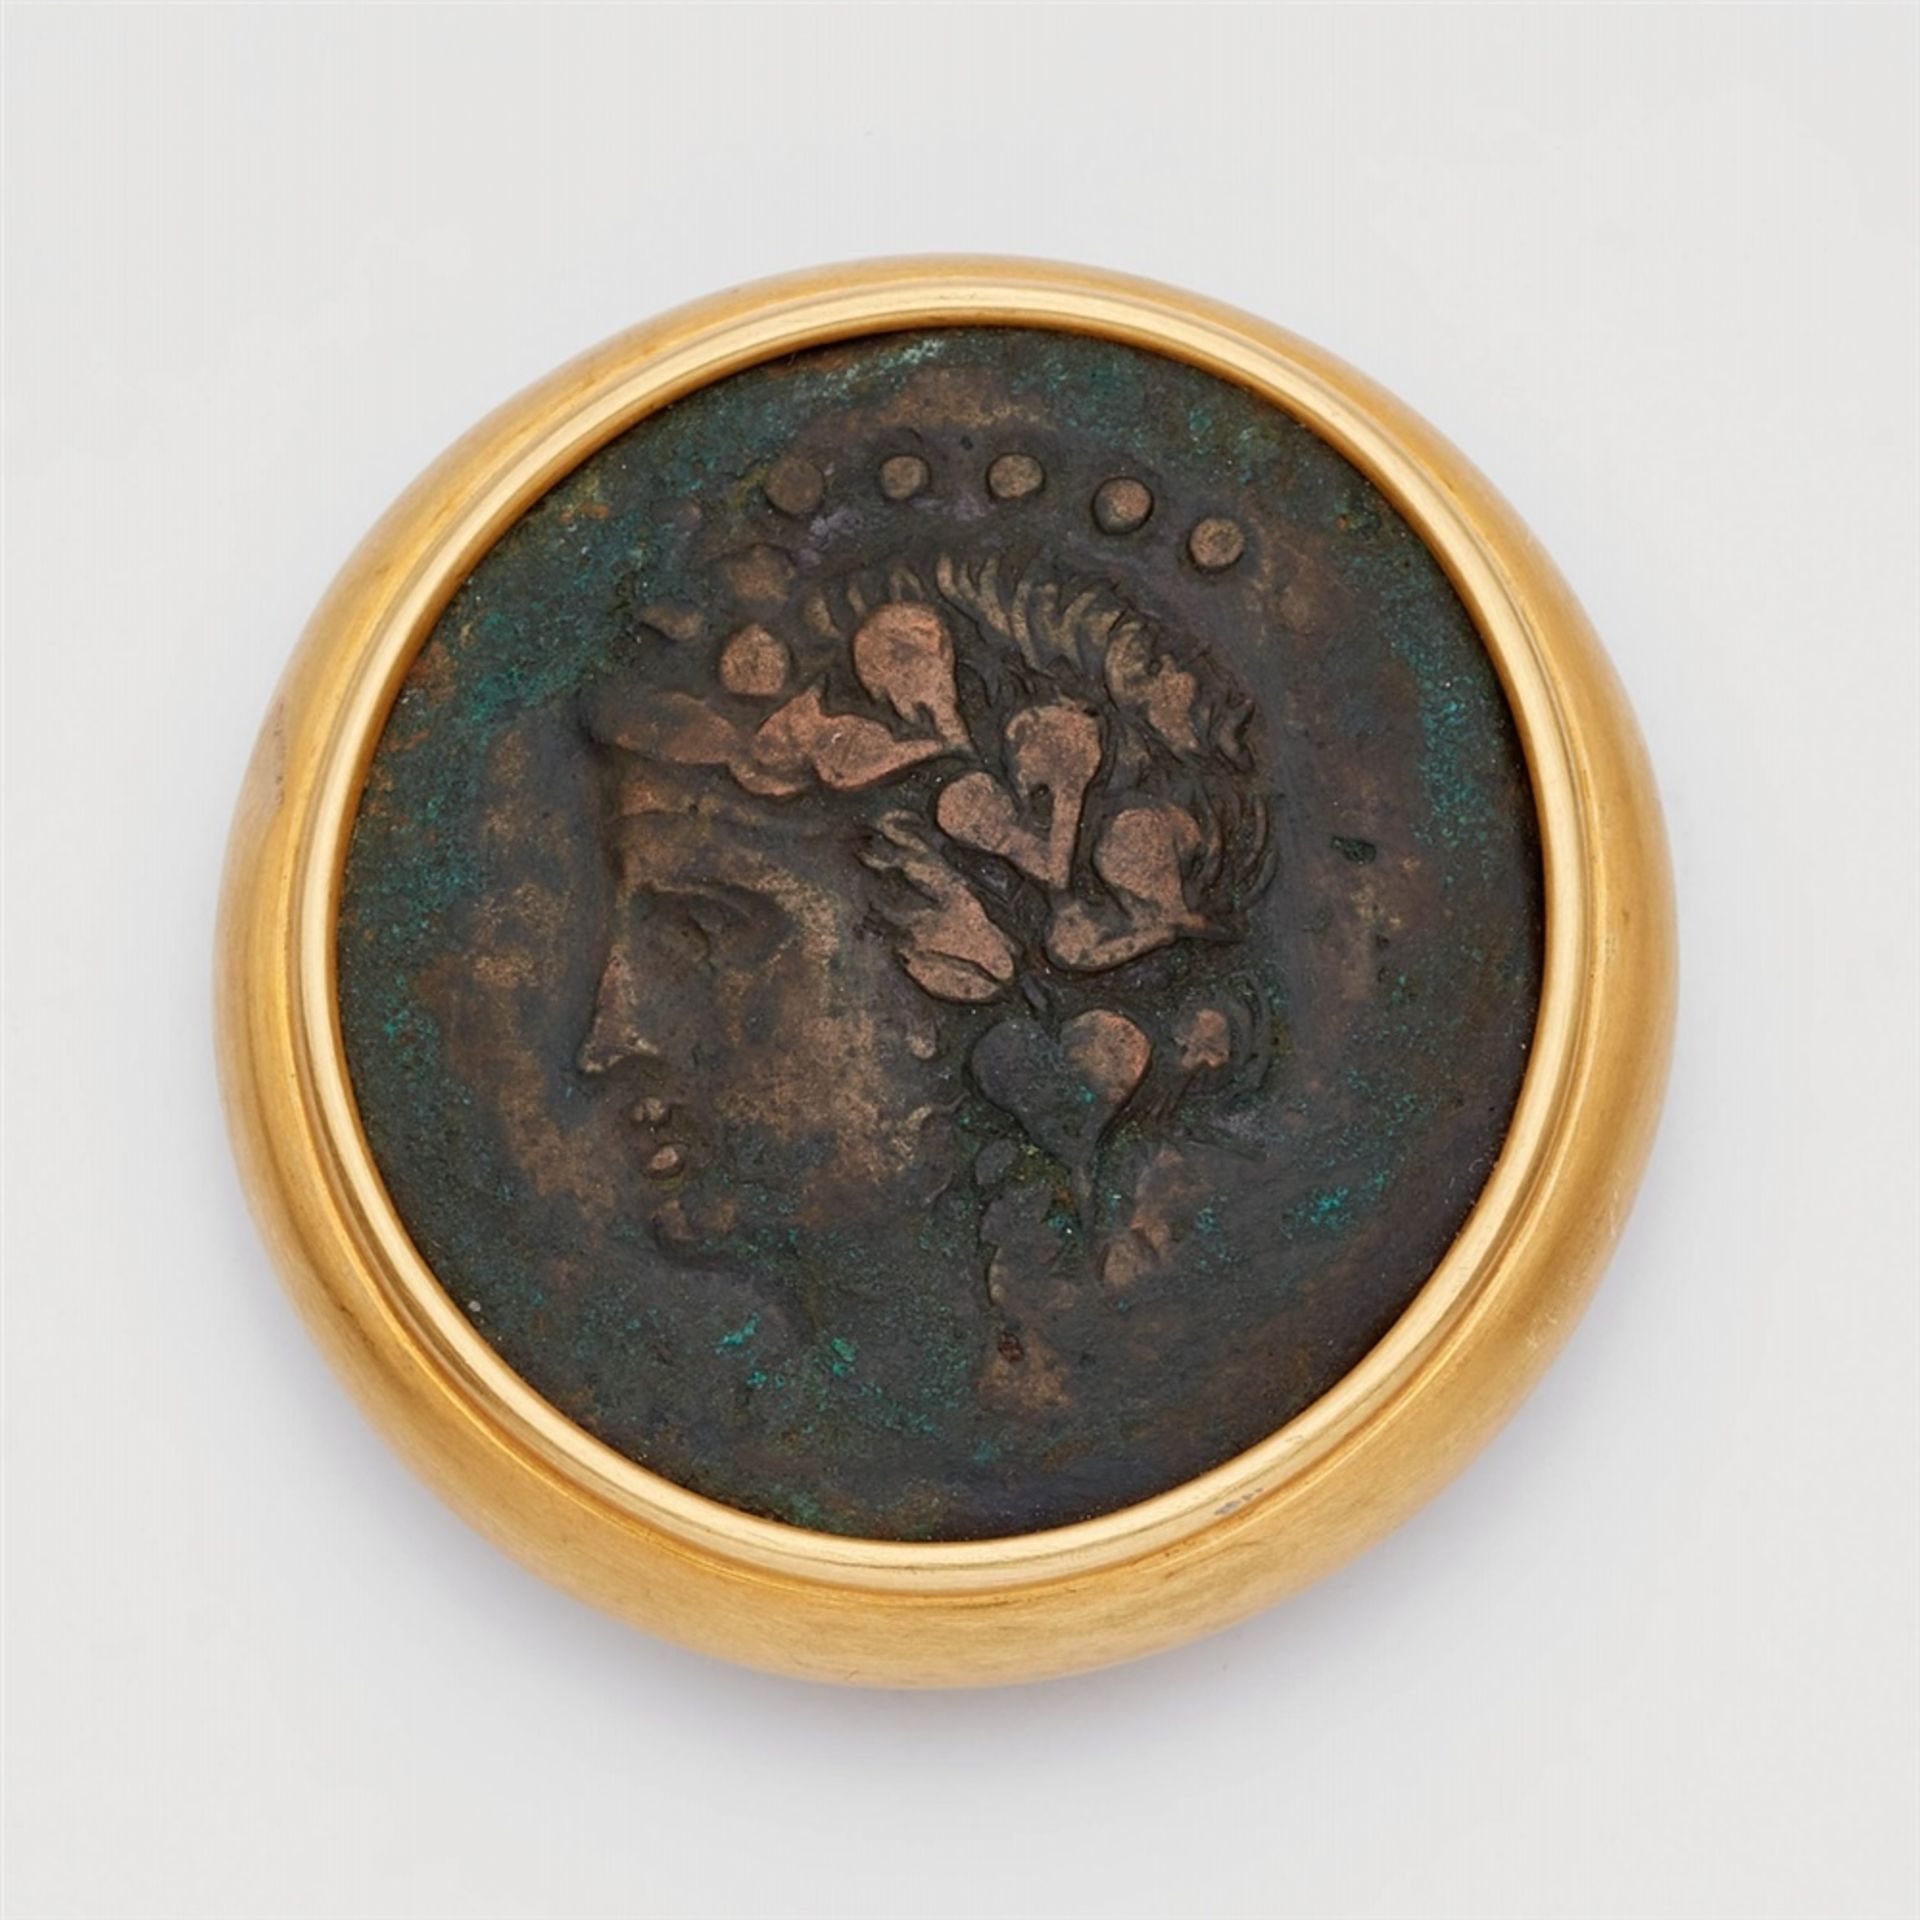 An 18k gold brooch with a Hellenistic bronze coinAn ancient bronze drachmae with the head of